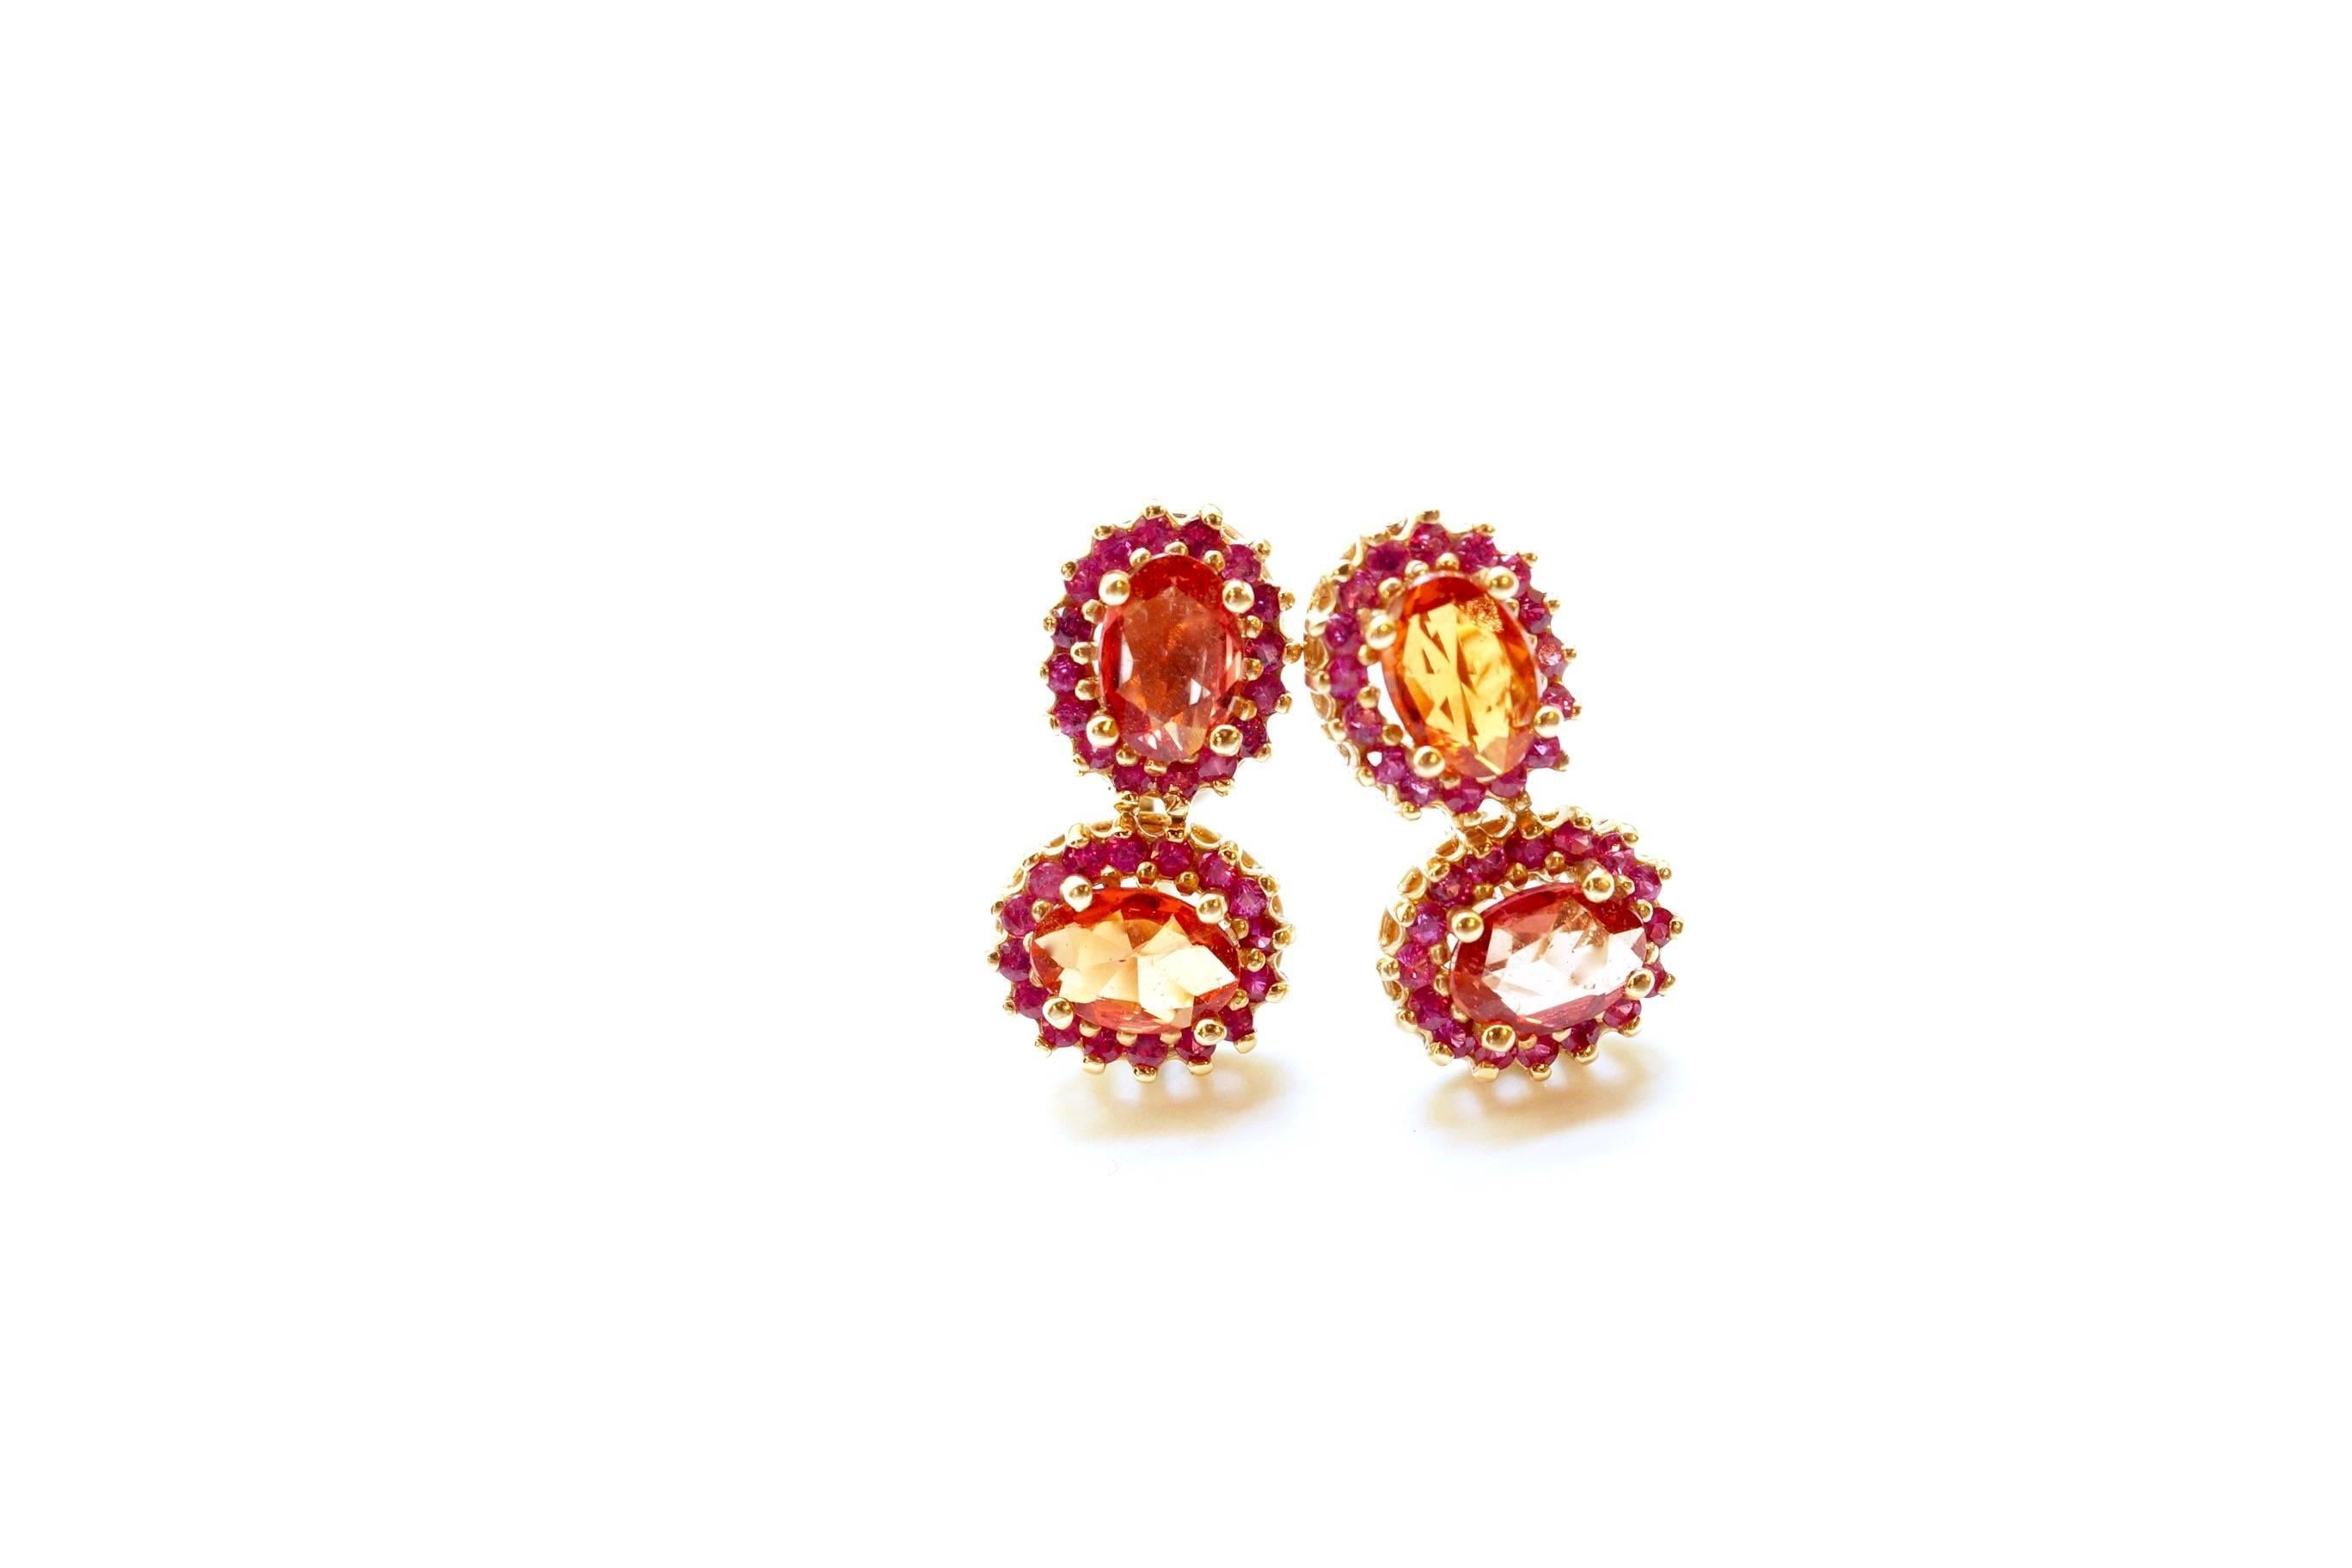 Larra Eardrops
A pair of eighteen-karat pink gold detachable earpendants, composed of three motifs.  The two top motifs, oval faceted orange sapphires, have been surrounded with smaller pink sapphires.  Dropping directly below is a single organic